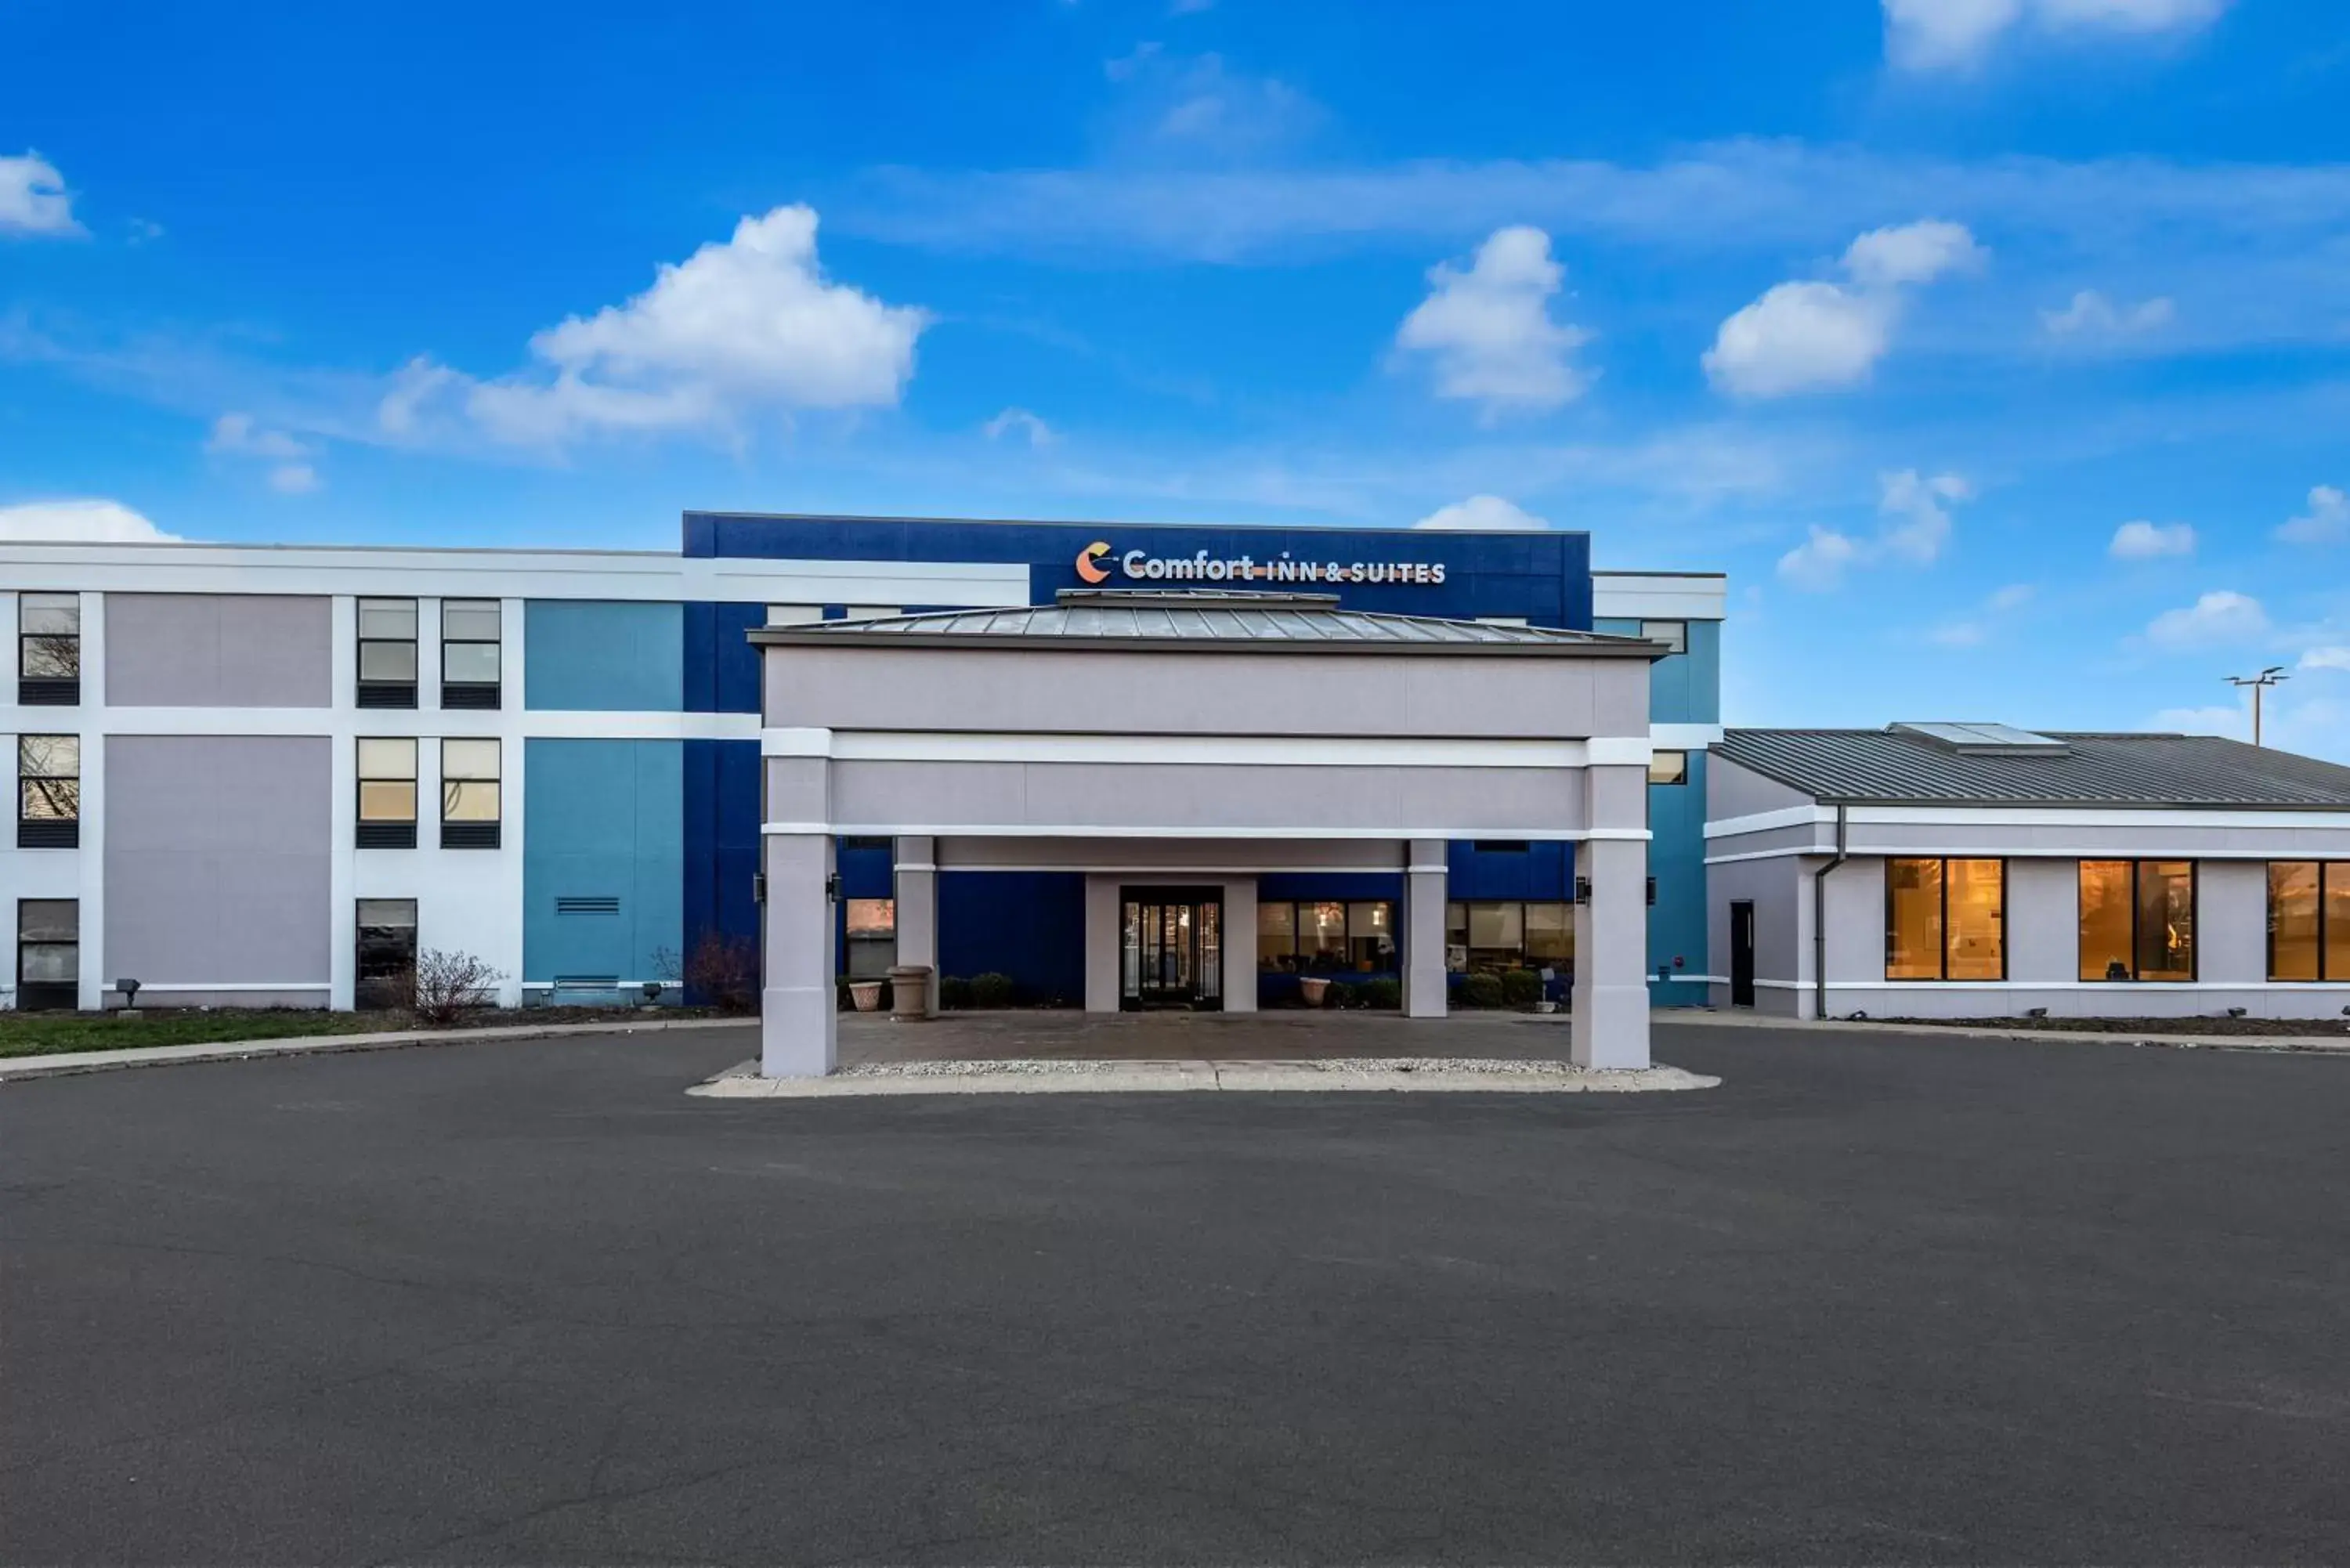 Property Building in Comfort Inn & Suites Fishers - Indianapolis